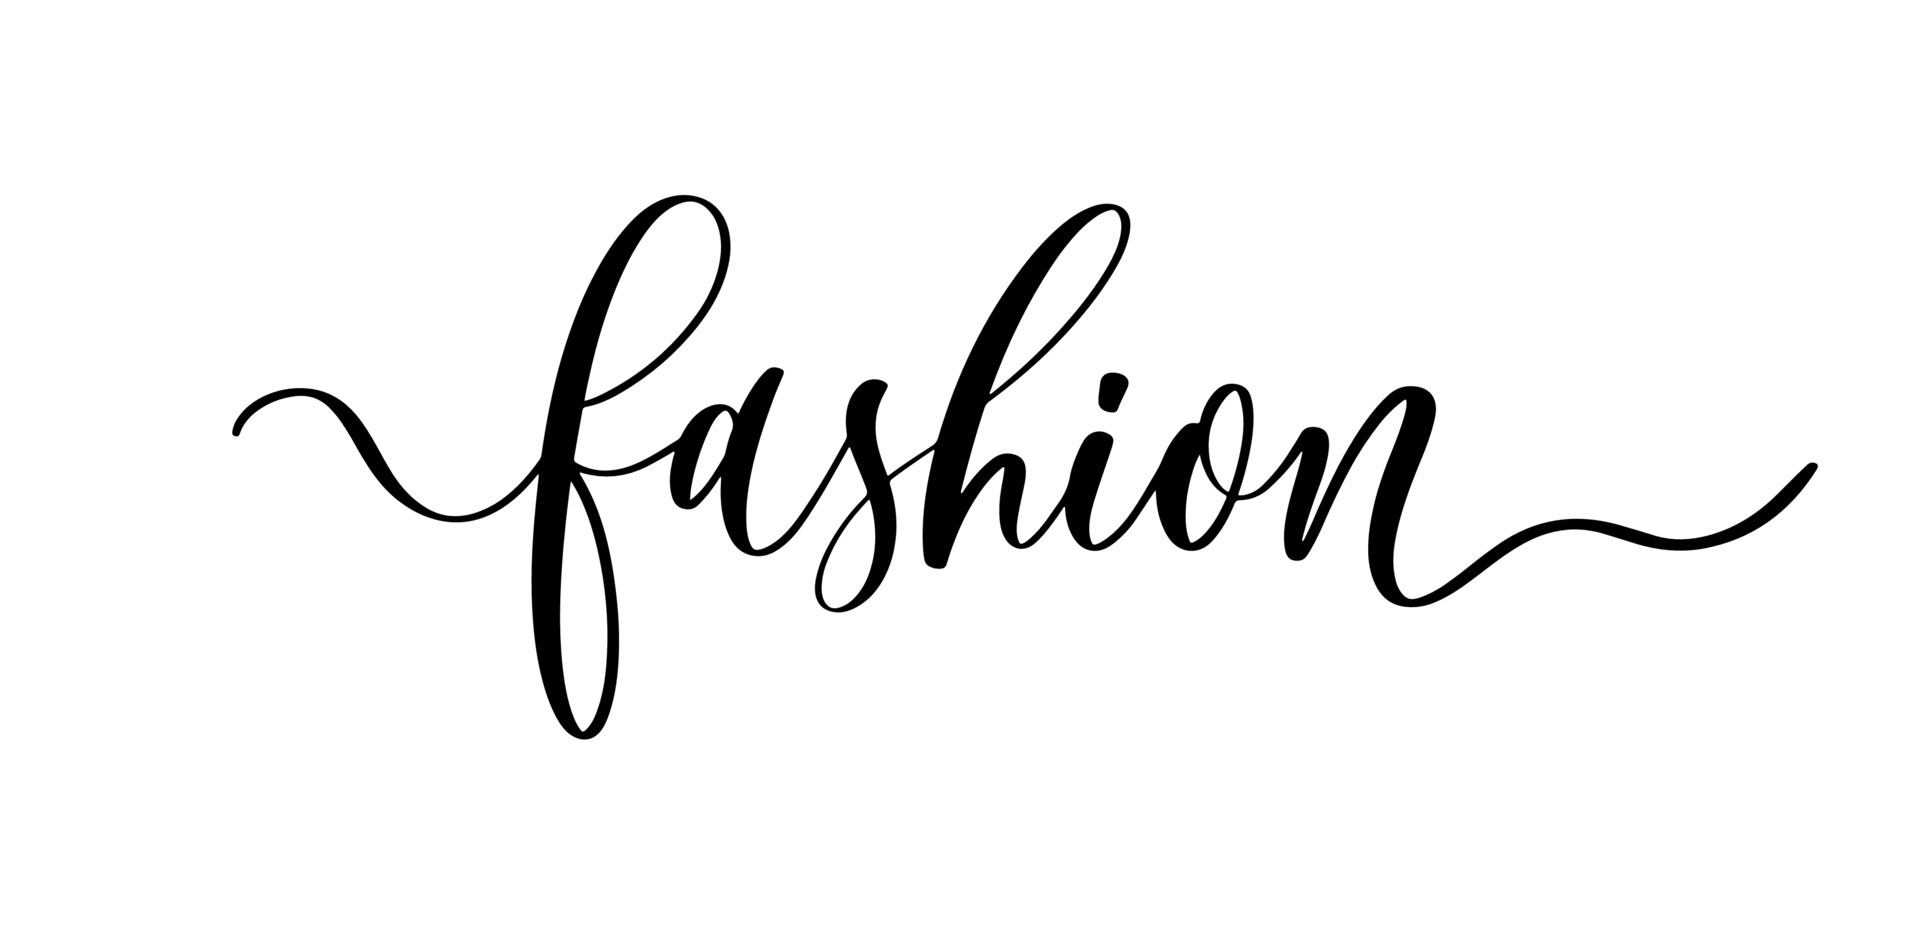 Fashion - hand lettering inscription, motivation and inspiration ...